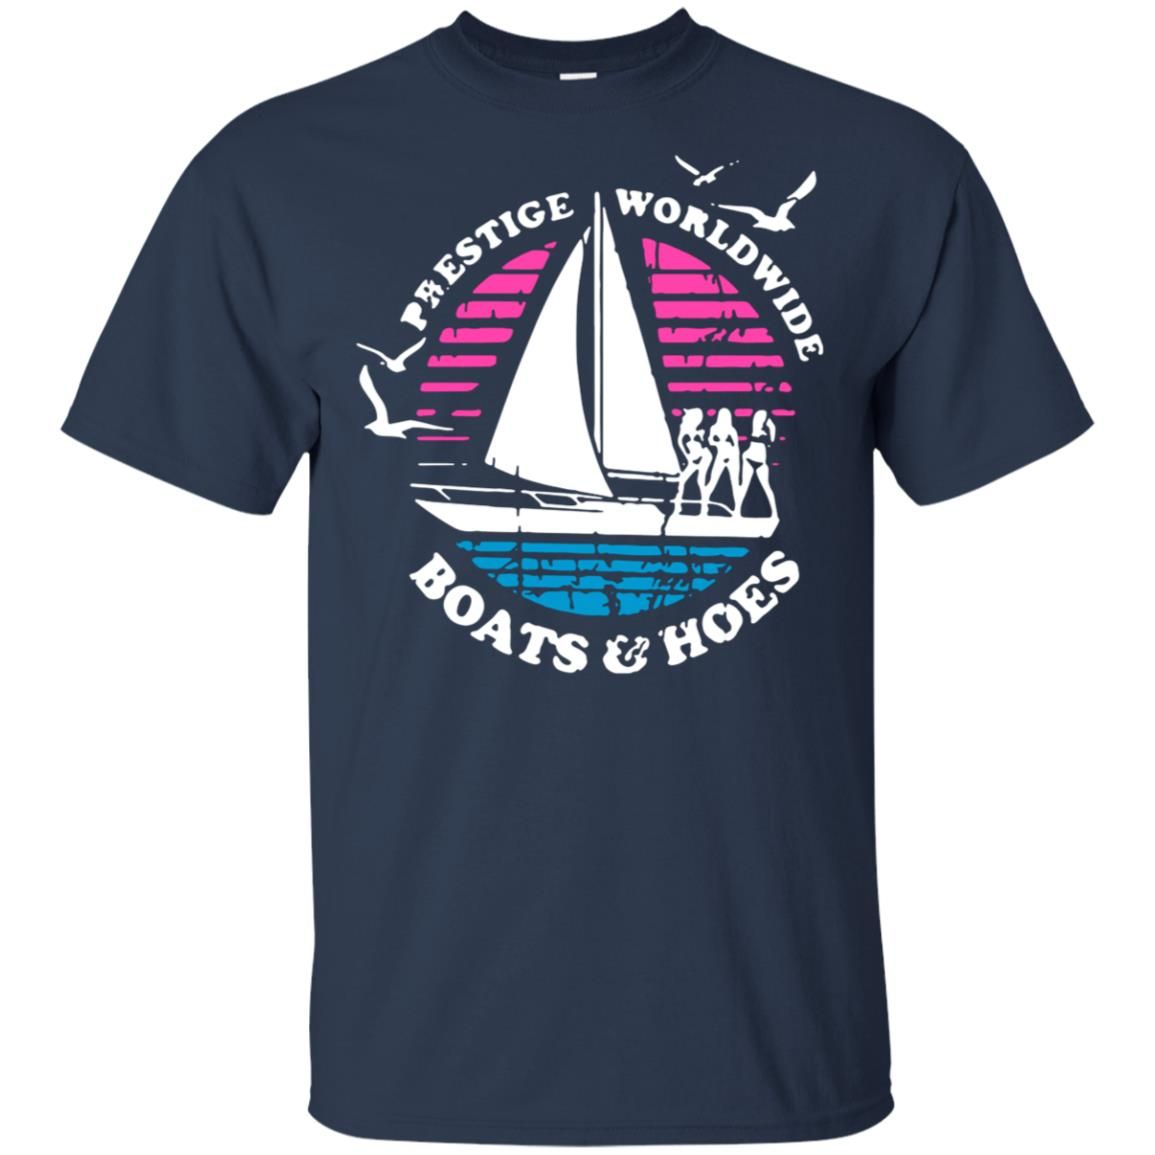 Prestige worldwide boats and hoes shirt Style: Gildan Ultra Cotton T-Shirt, Color: Navy